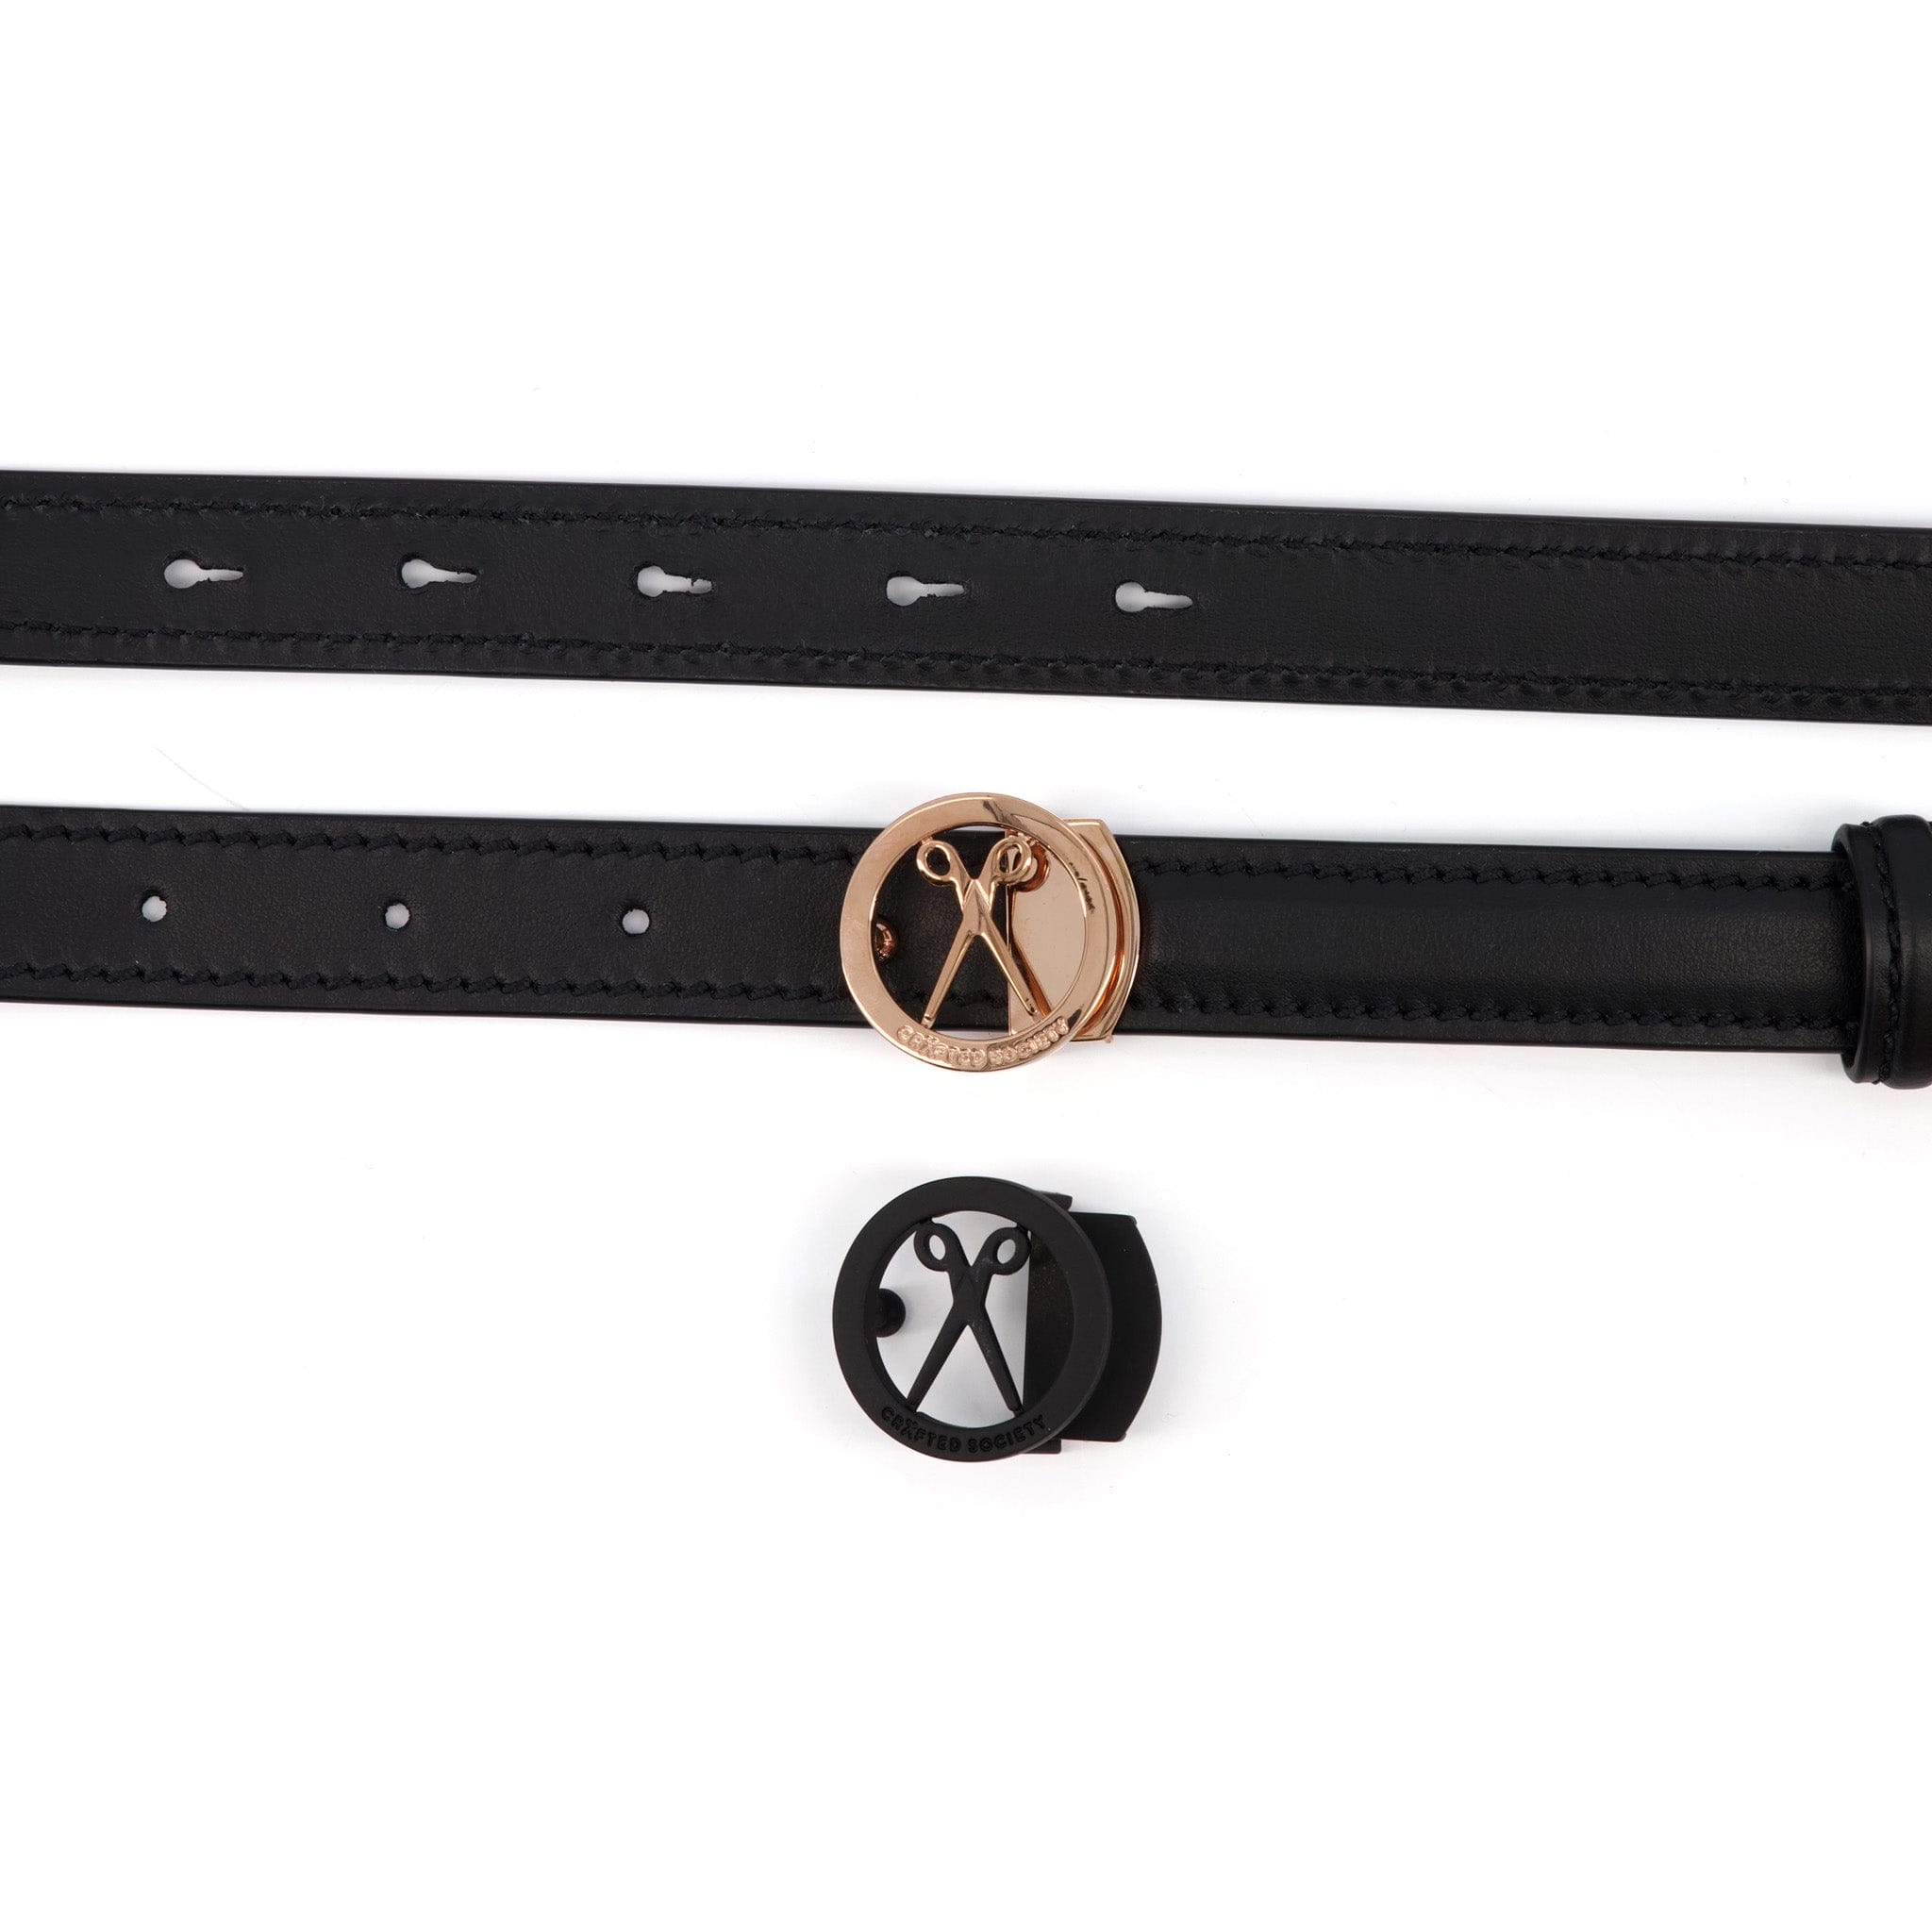 Black Nappa Leather Belt | 2.0cm | 2 Buckles | Made in Italy